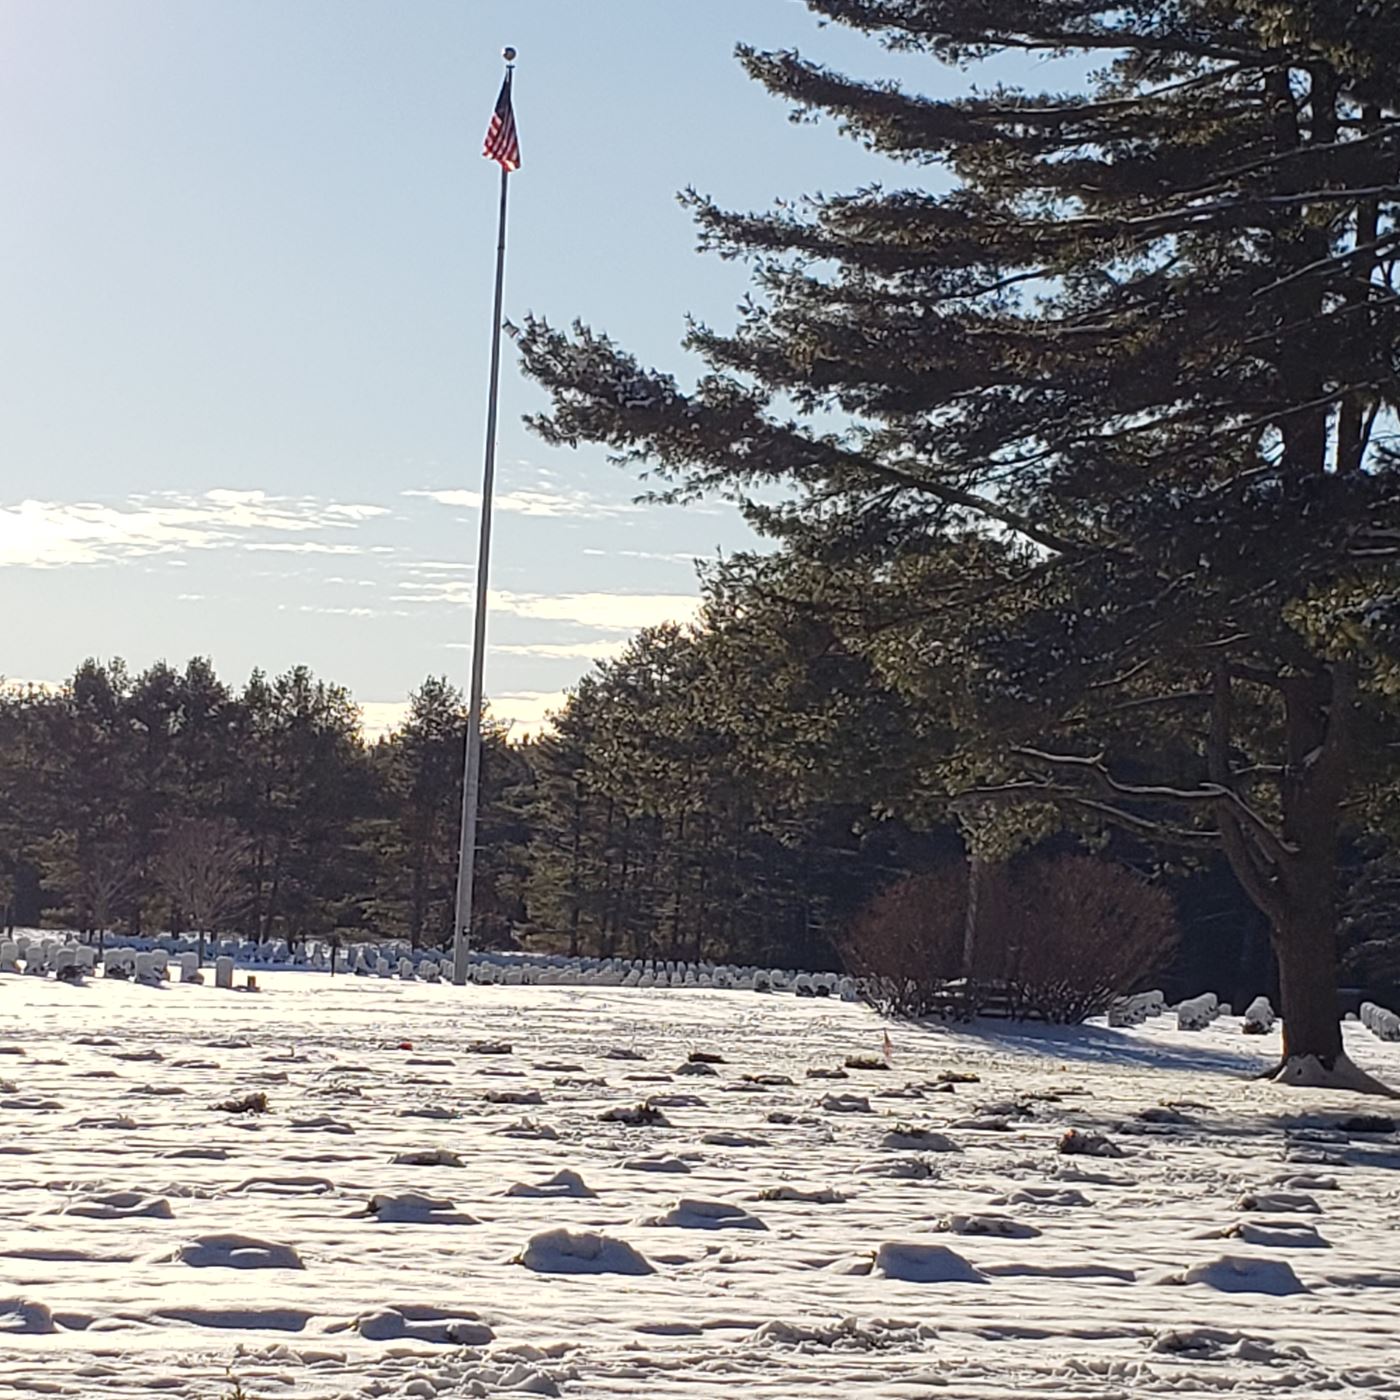 December 19, 2021 - Day after Wreaths Across America Day - After the snow storm